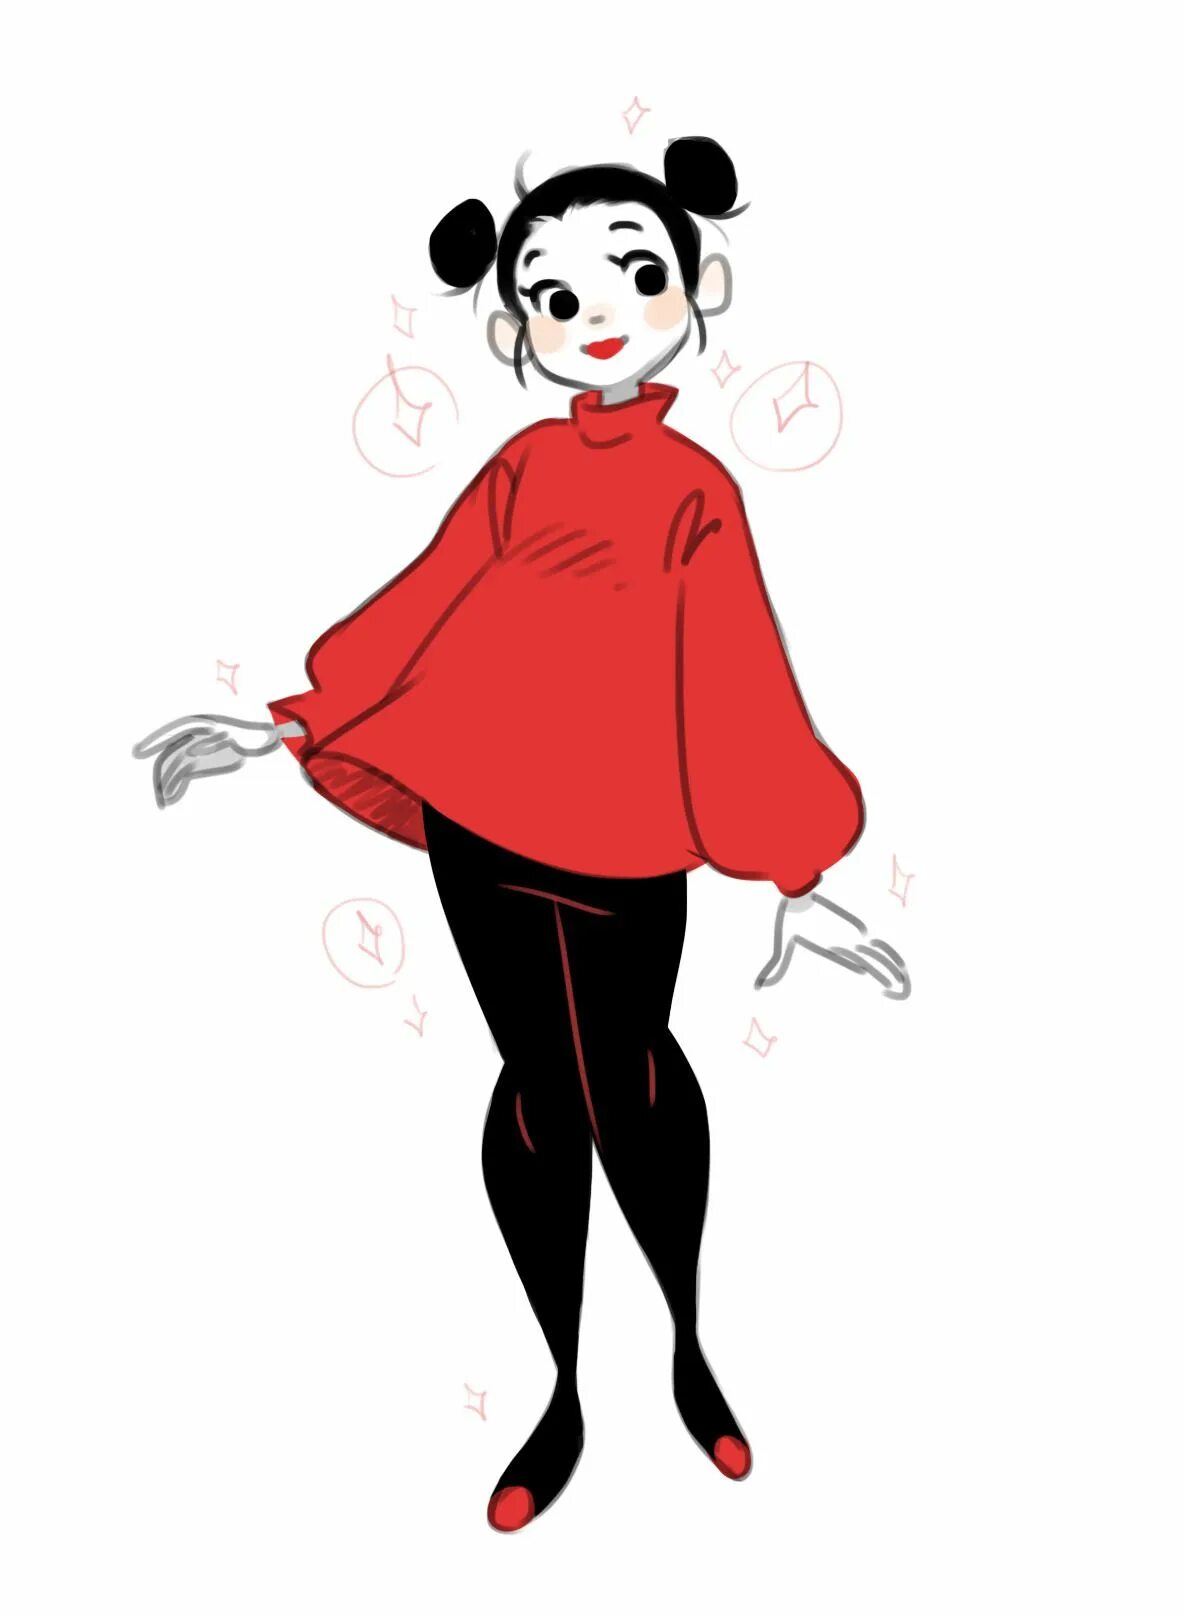 Женский пук. Пукка. Pucca characters. Pucca люди.